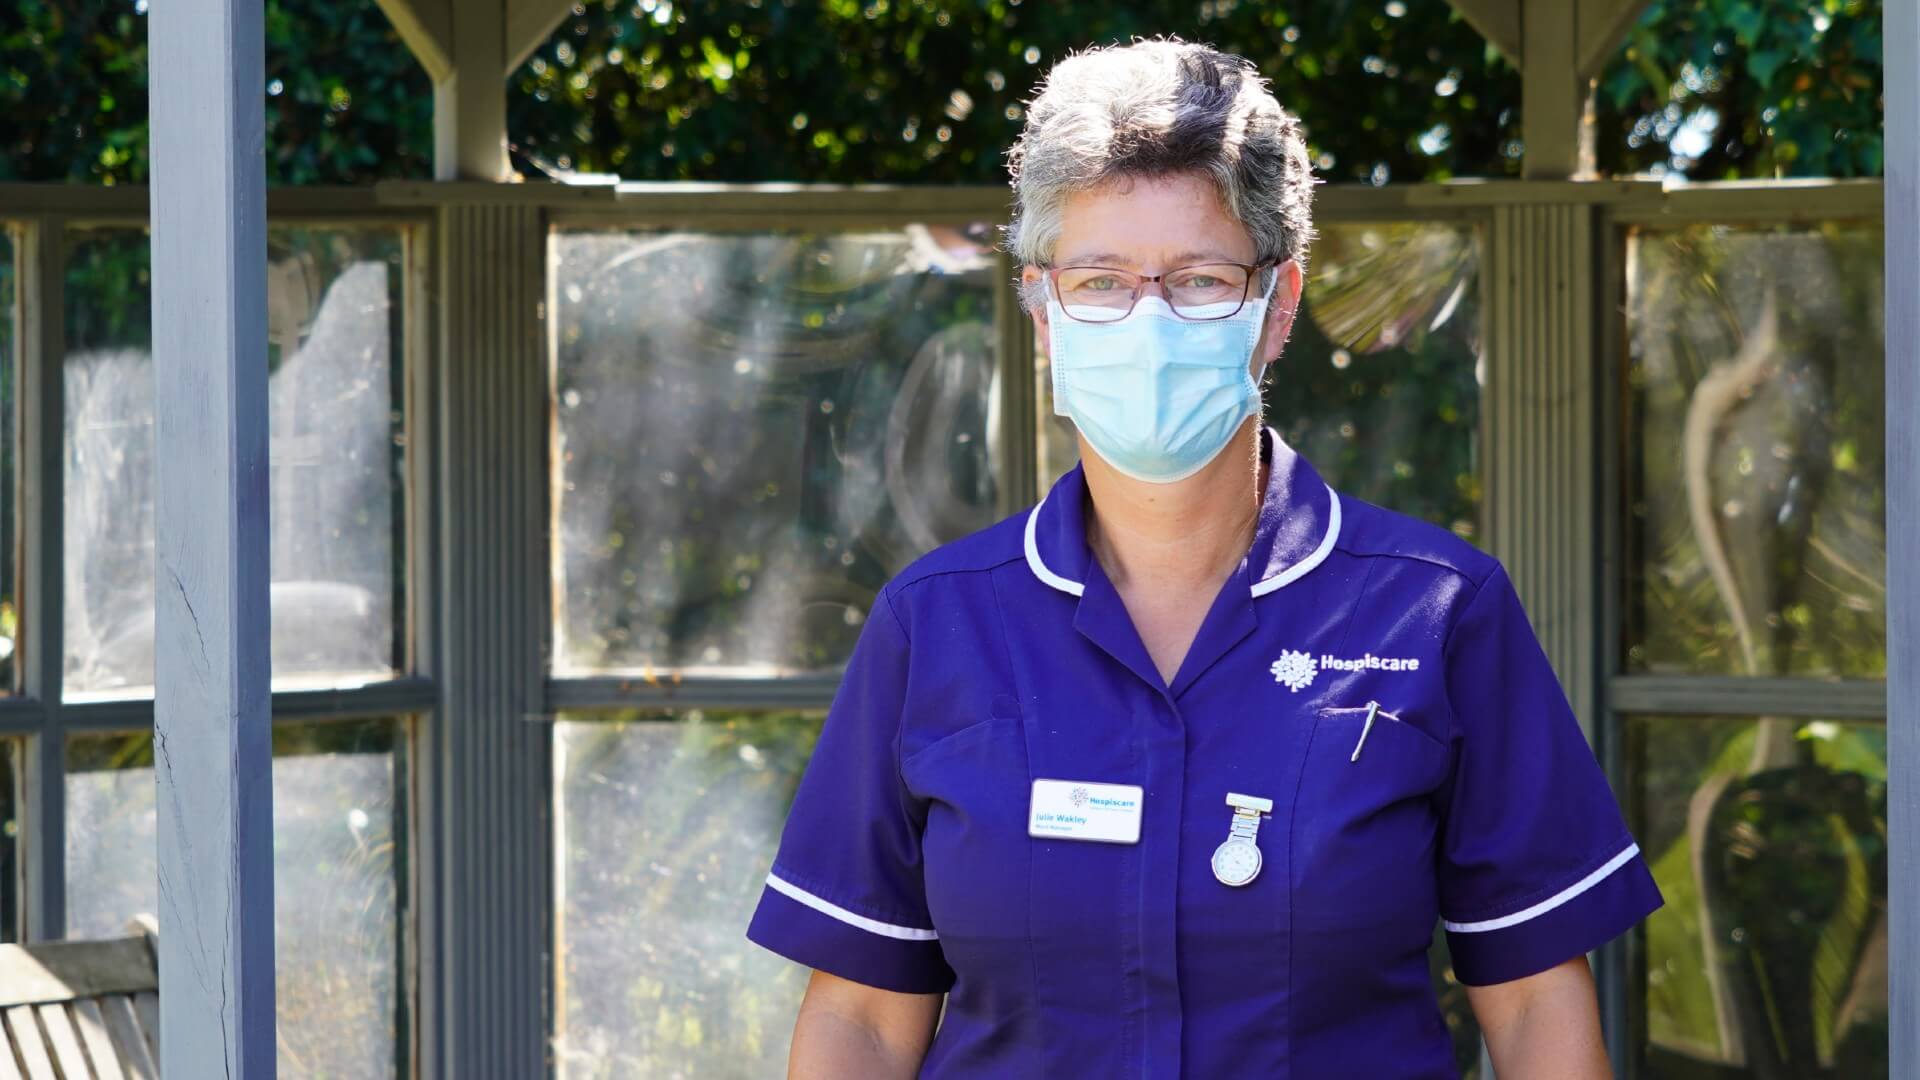 A day in the life of a Hospiscare nurse during the COVID-19 pandemic